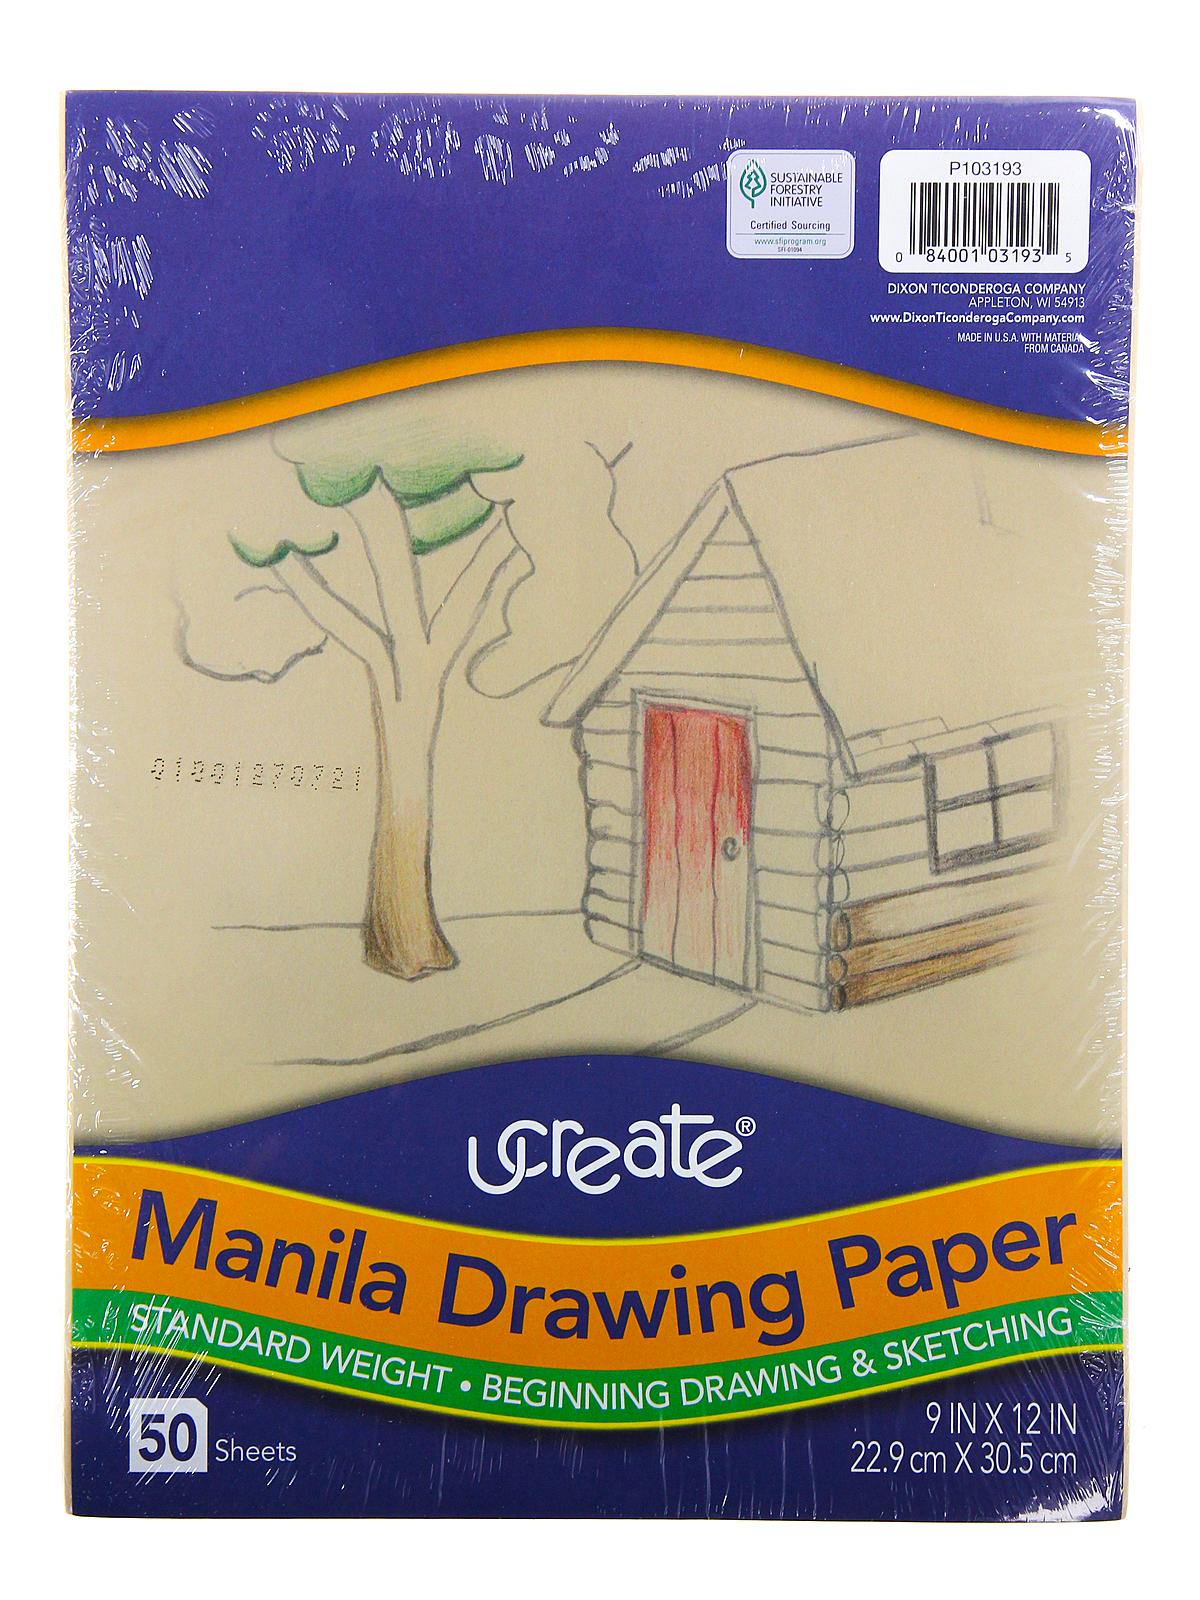 Pacon Cream Manila Drawing Paper, 50 lbs, 18 x 24, 500 Sheets/Pack